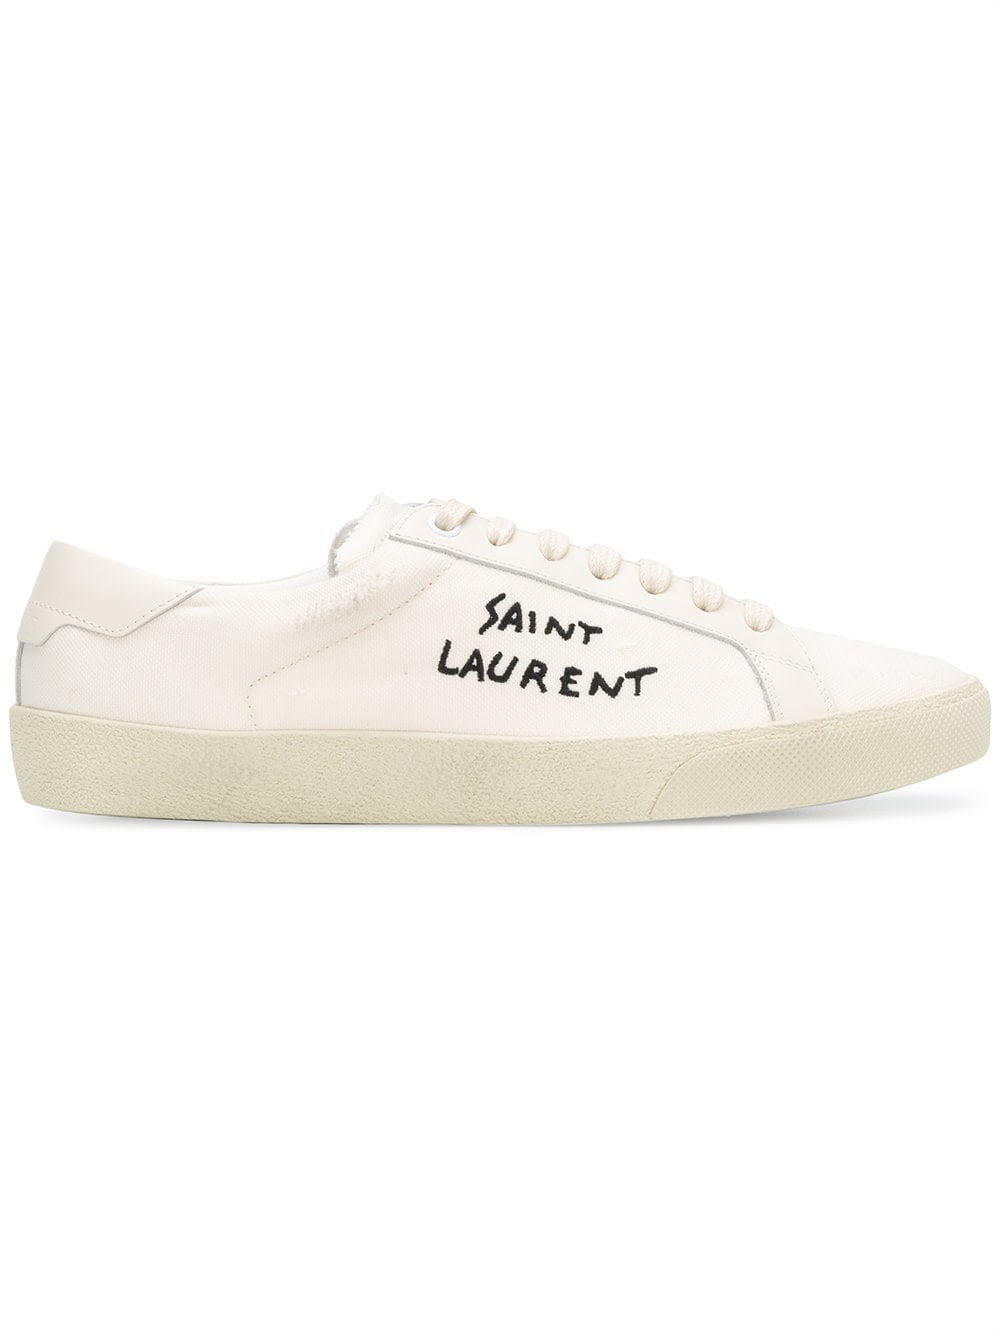 ysl court sneakers